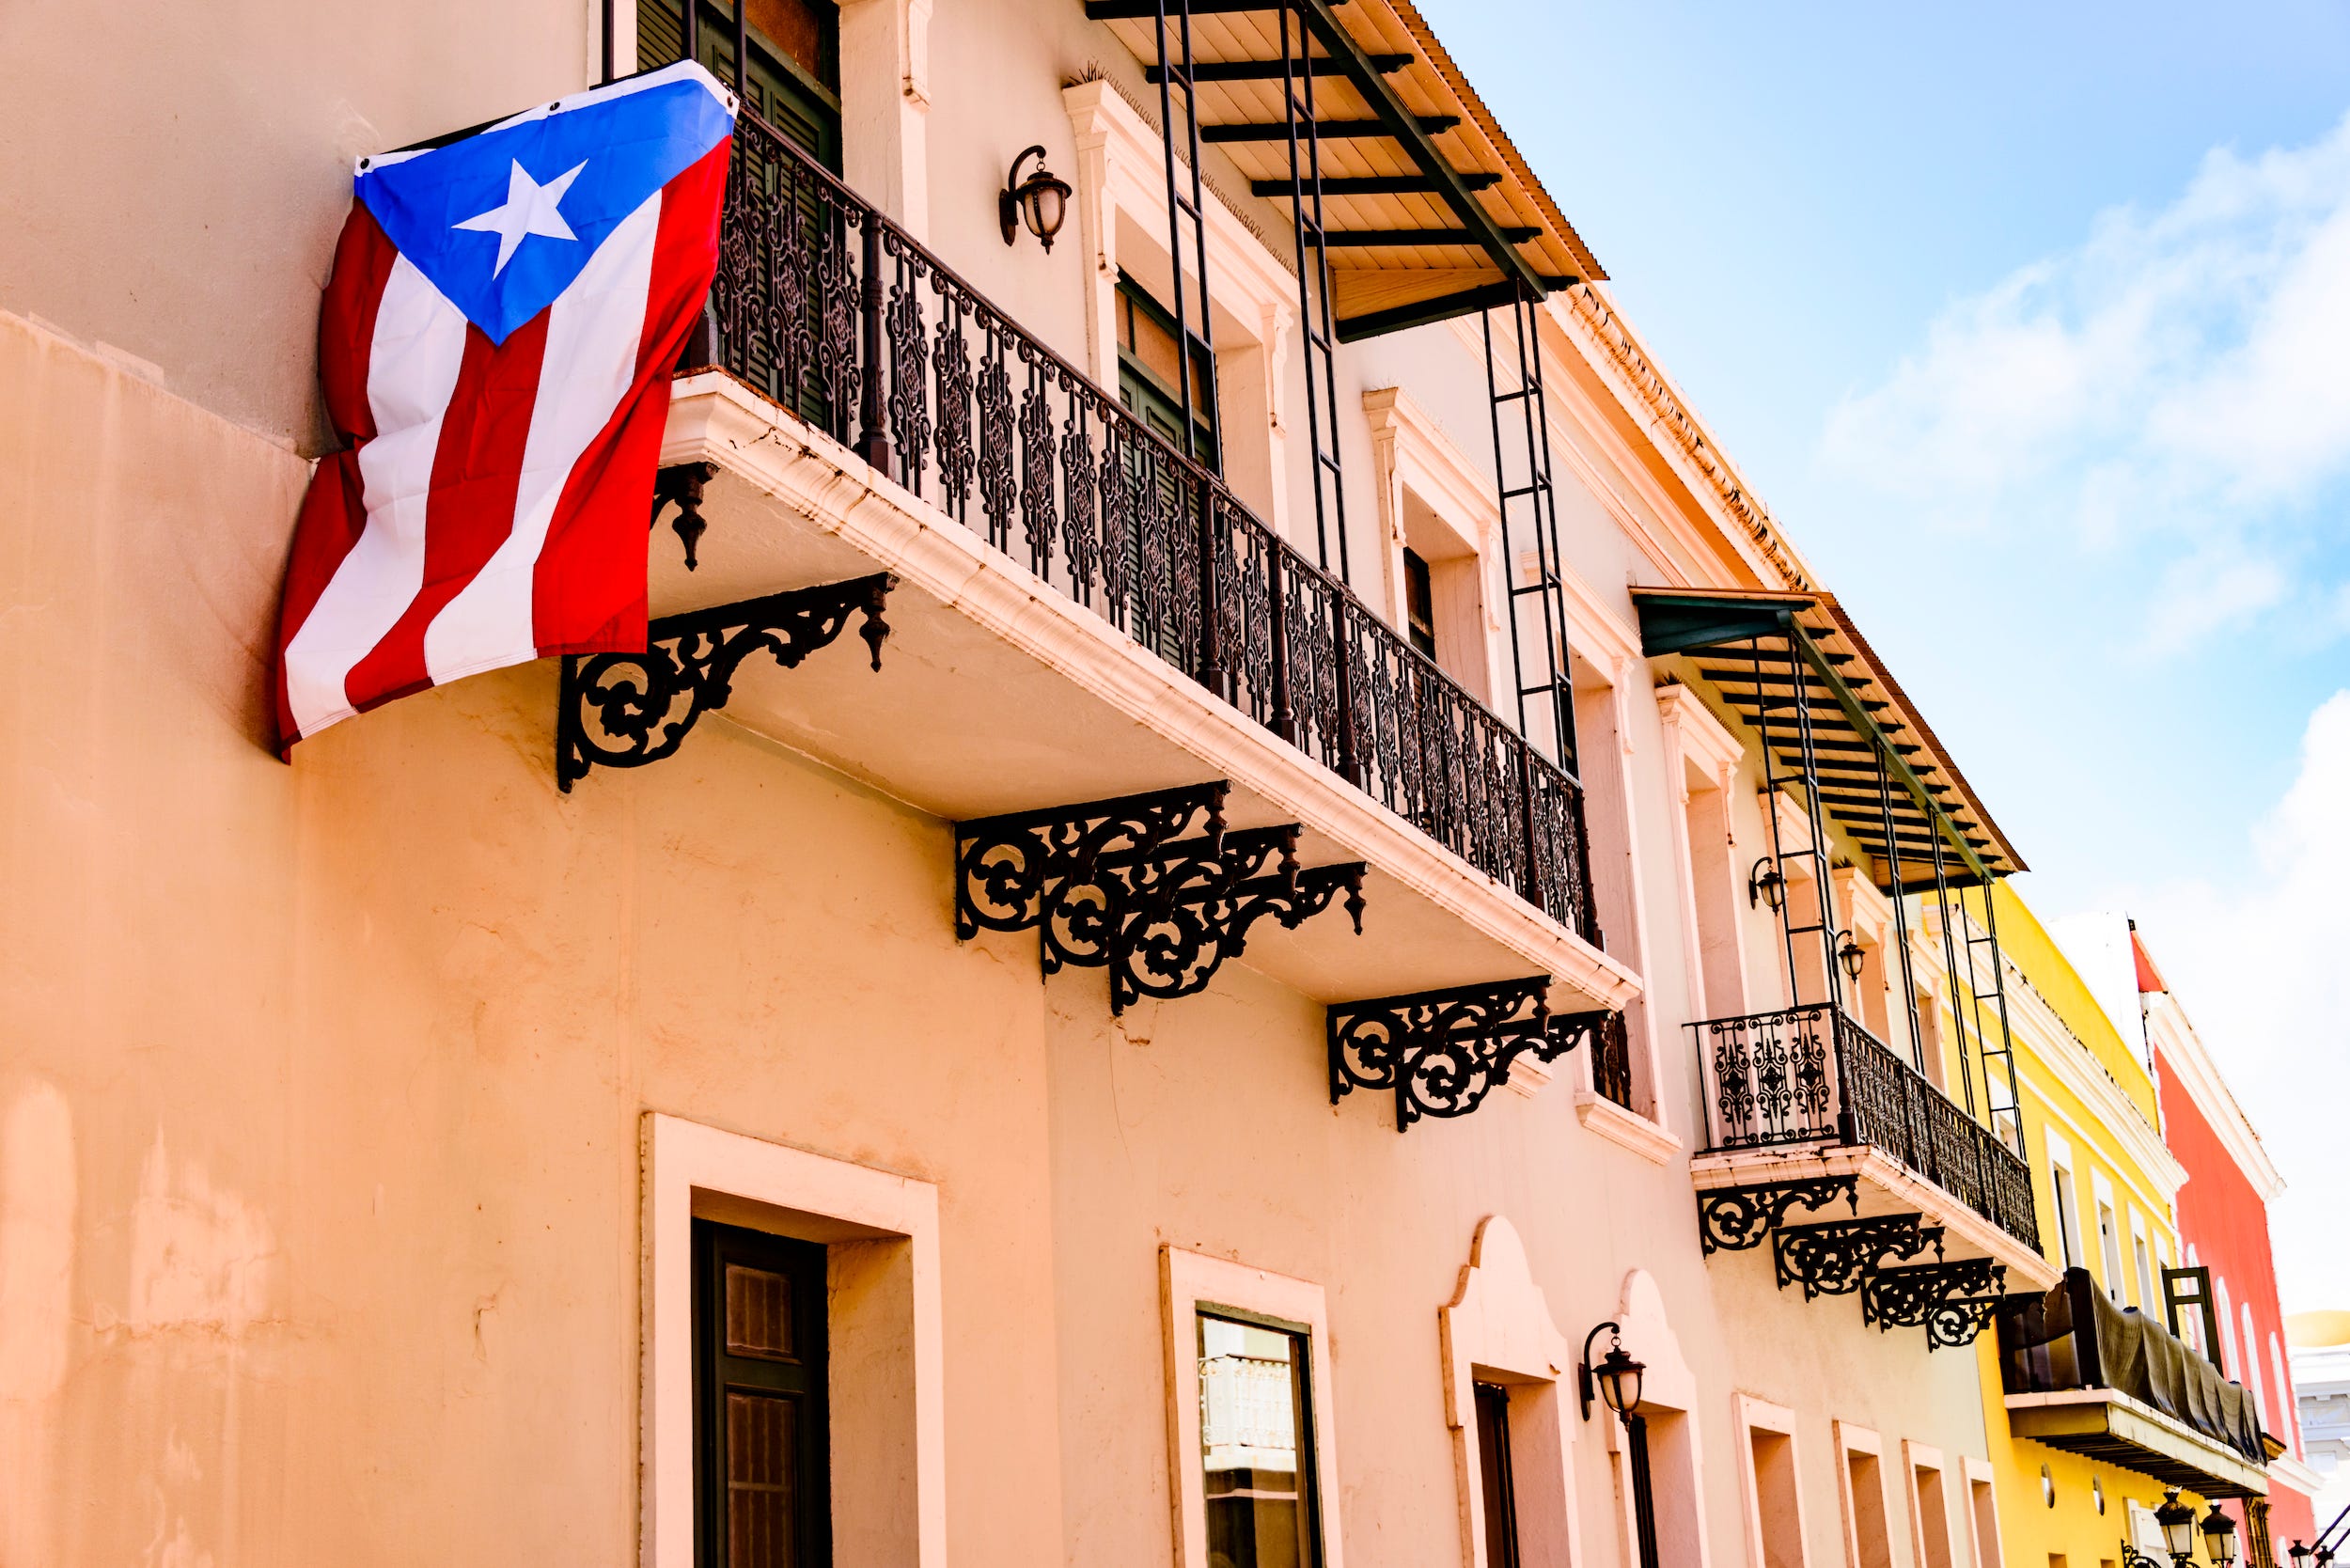 microsoft, puerto rican tax breaks are luring wealthy newcomers. a millennial says that's bad news for members of her generation with dreams of careers and homeownership.